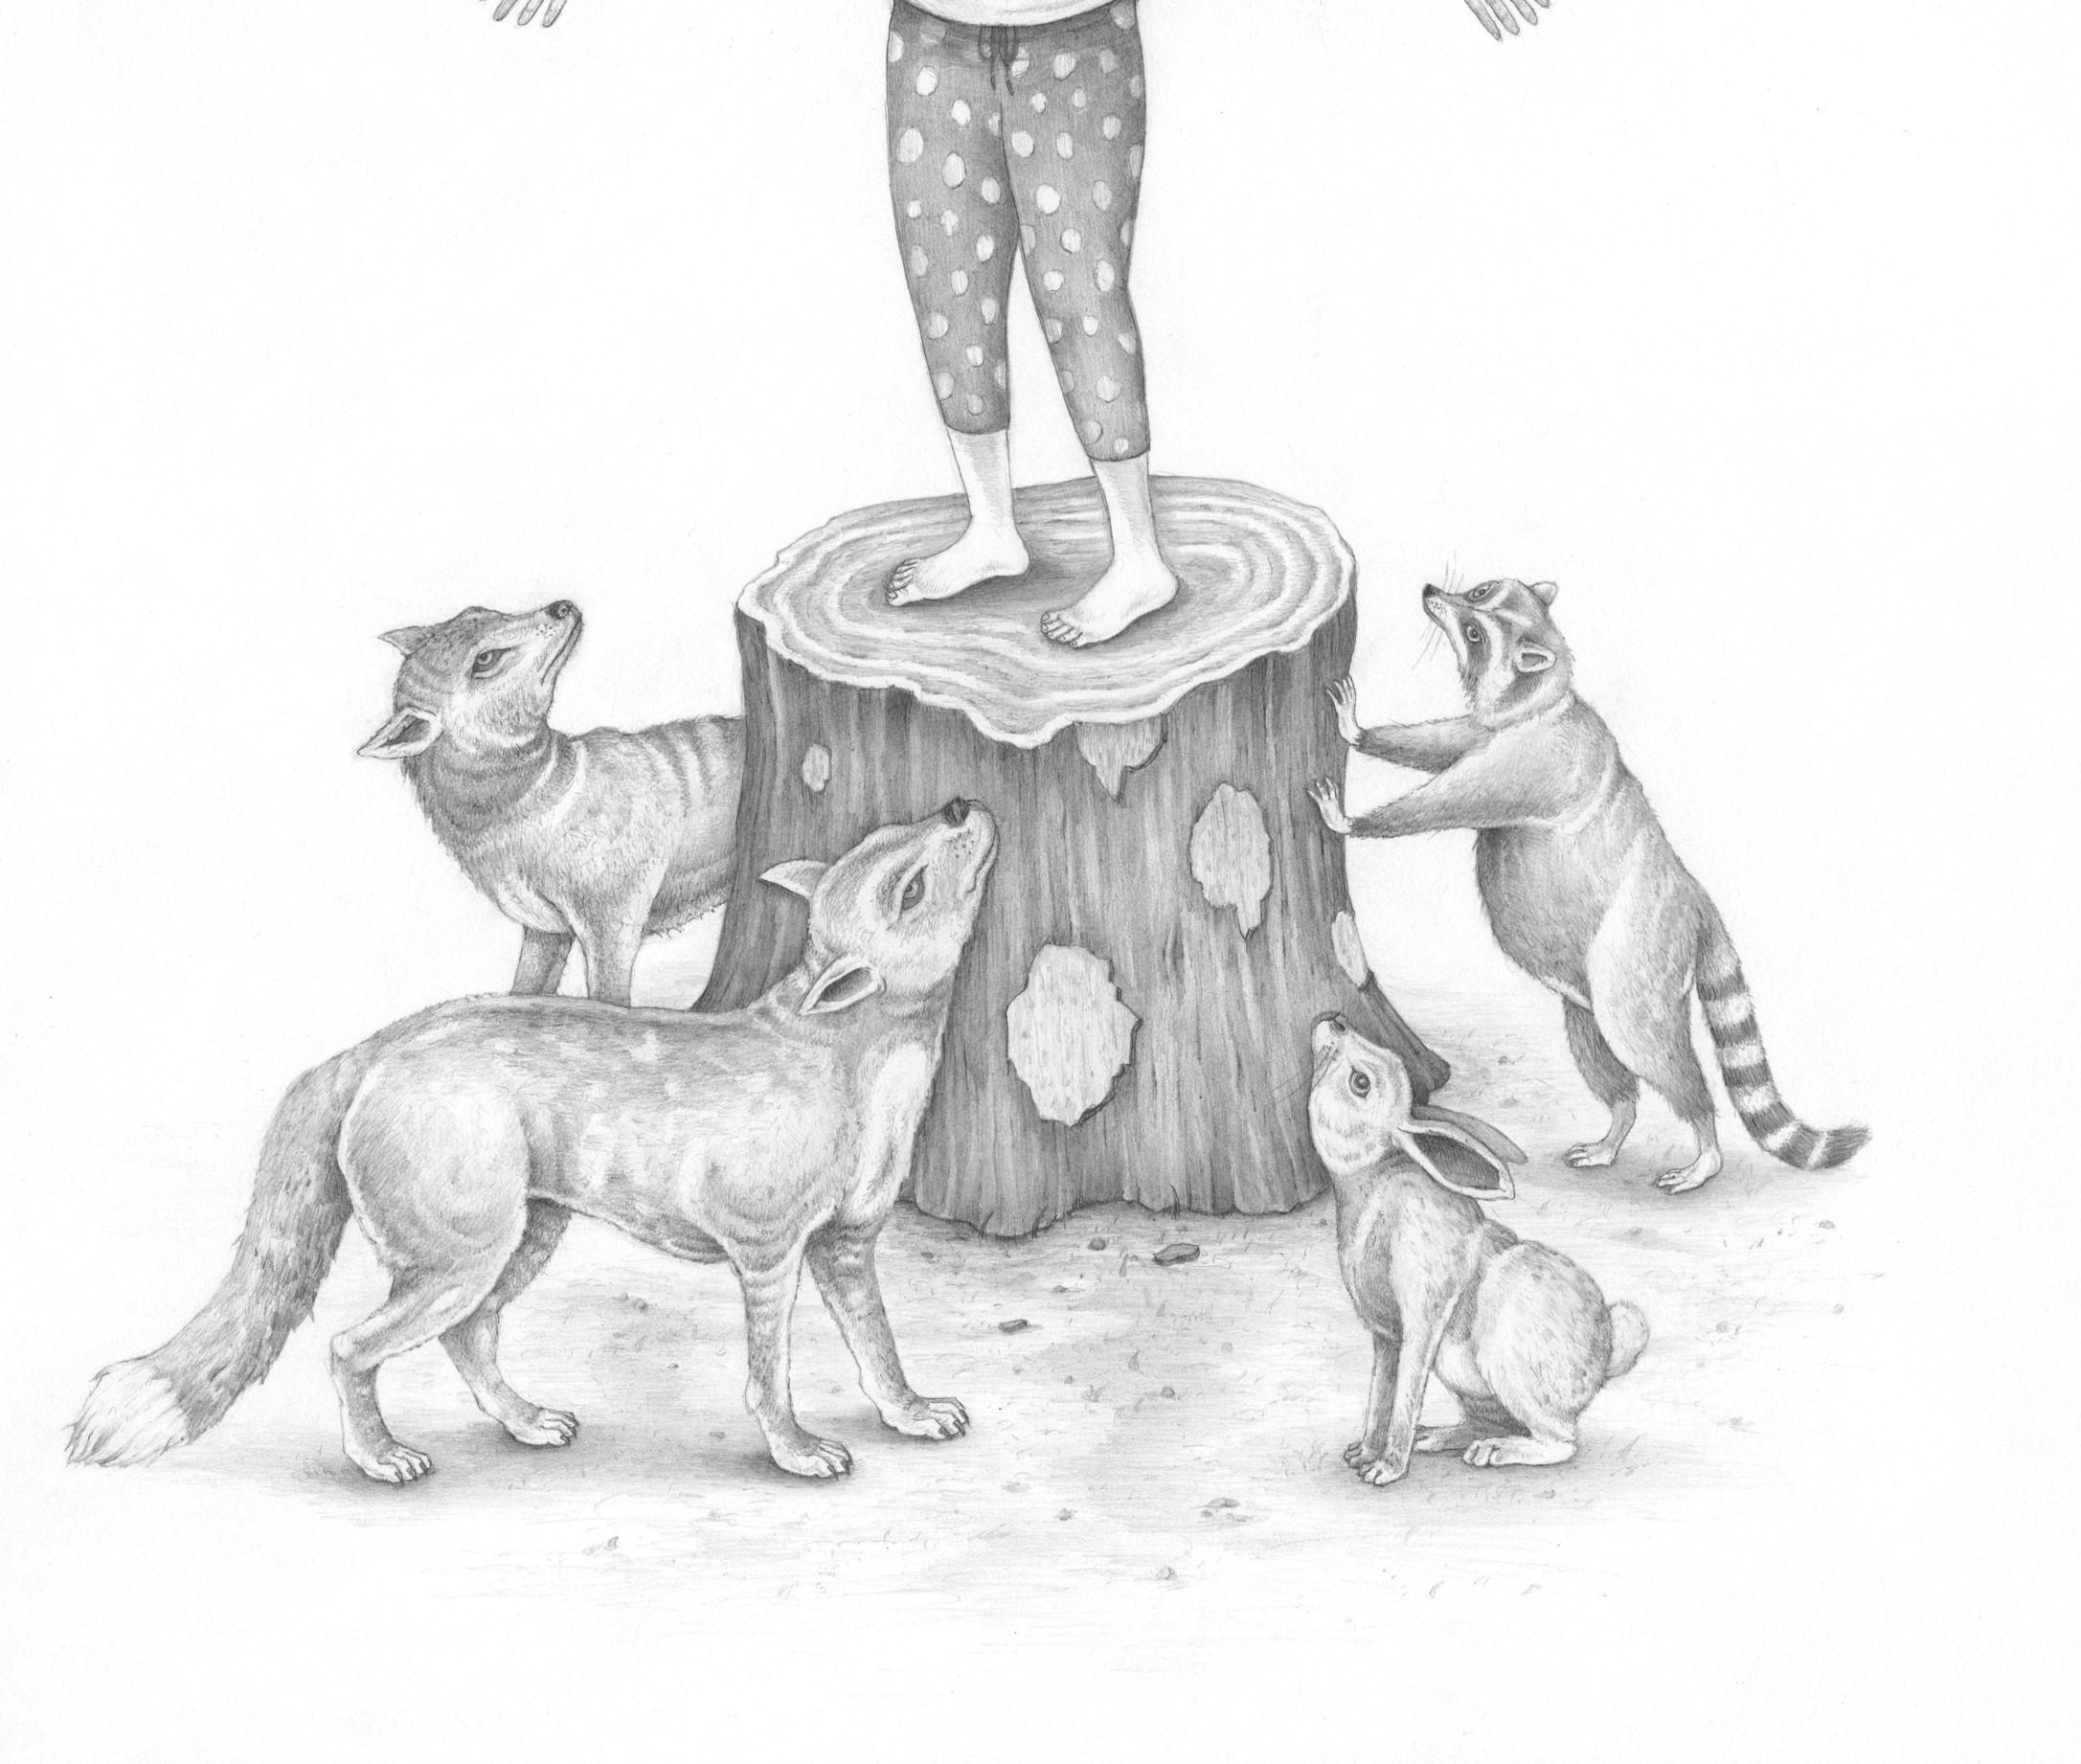 Tales from the Woods is a collection of drawings and prints by Mark Hosford that explore humans interacting with nature and their unique relationships to nature. Mark Hosford holds a BFA in Studio Arts from the University of Kansas and a MFA from